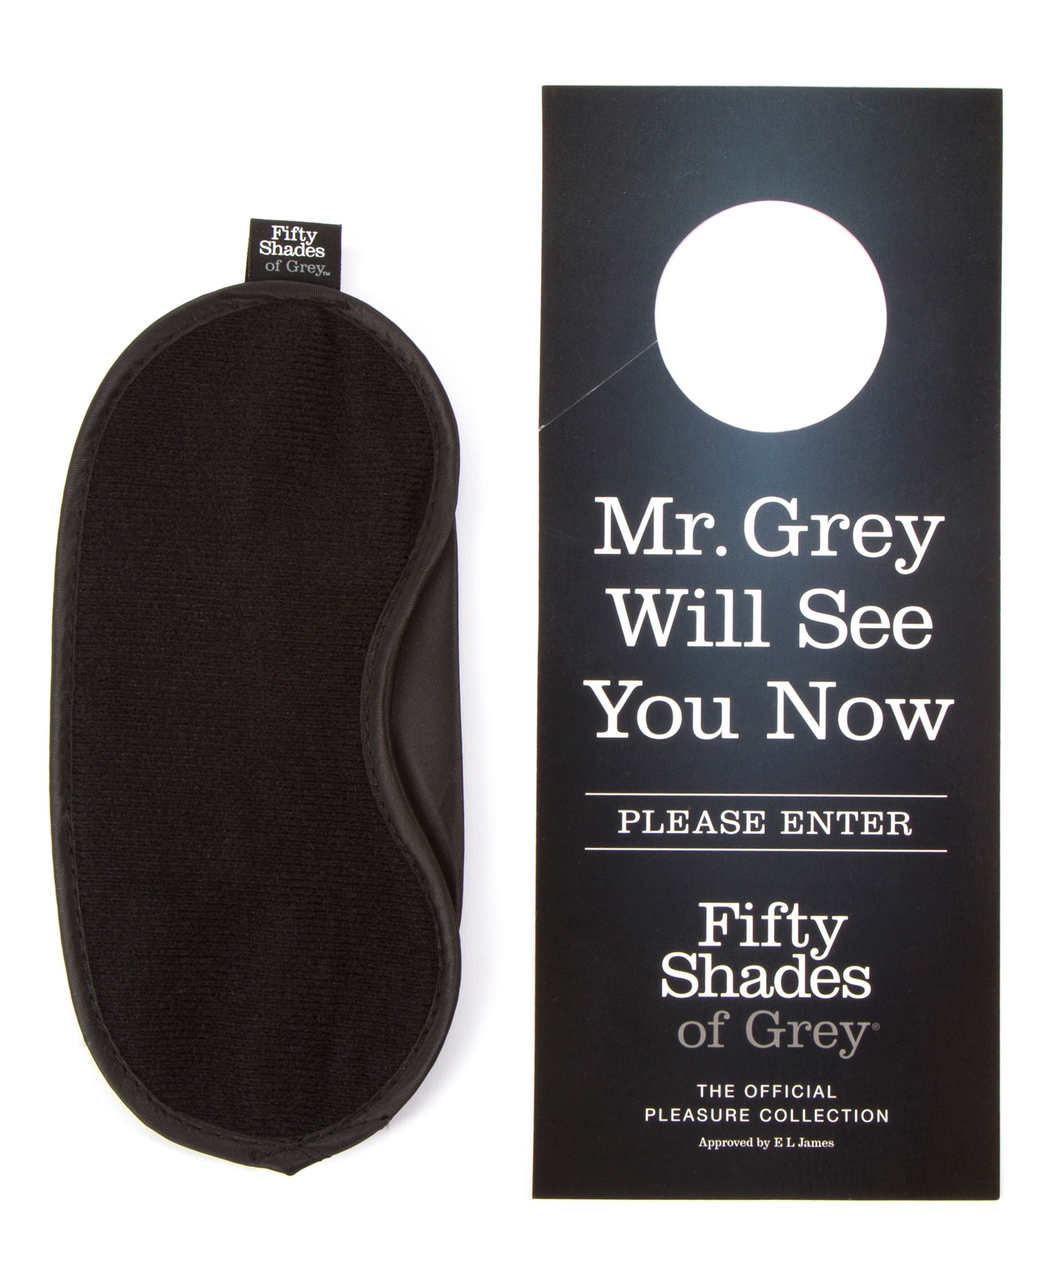 Fifty Shades of Grey Control Freak Under the Bed Stretcher